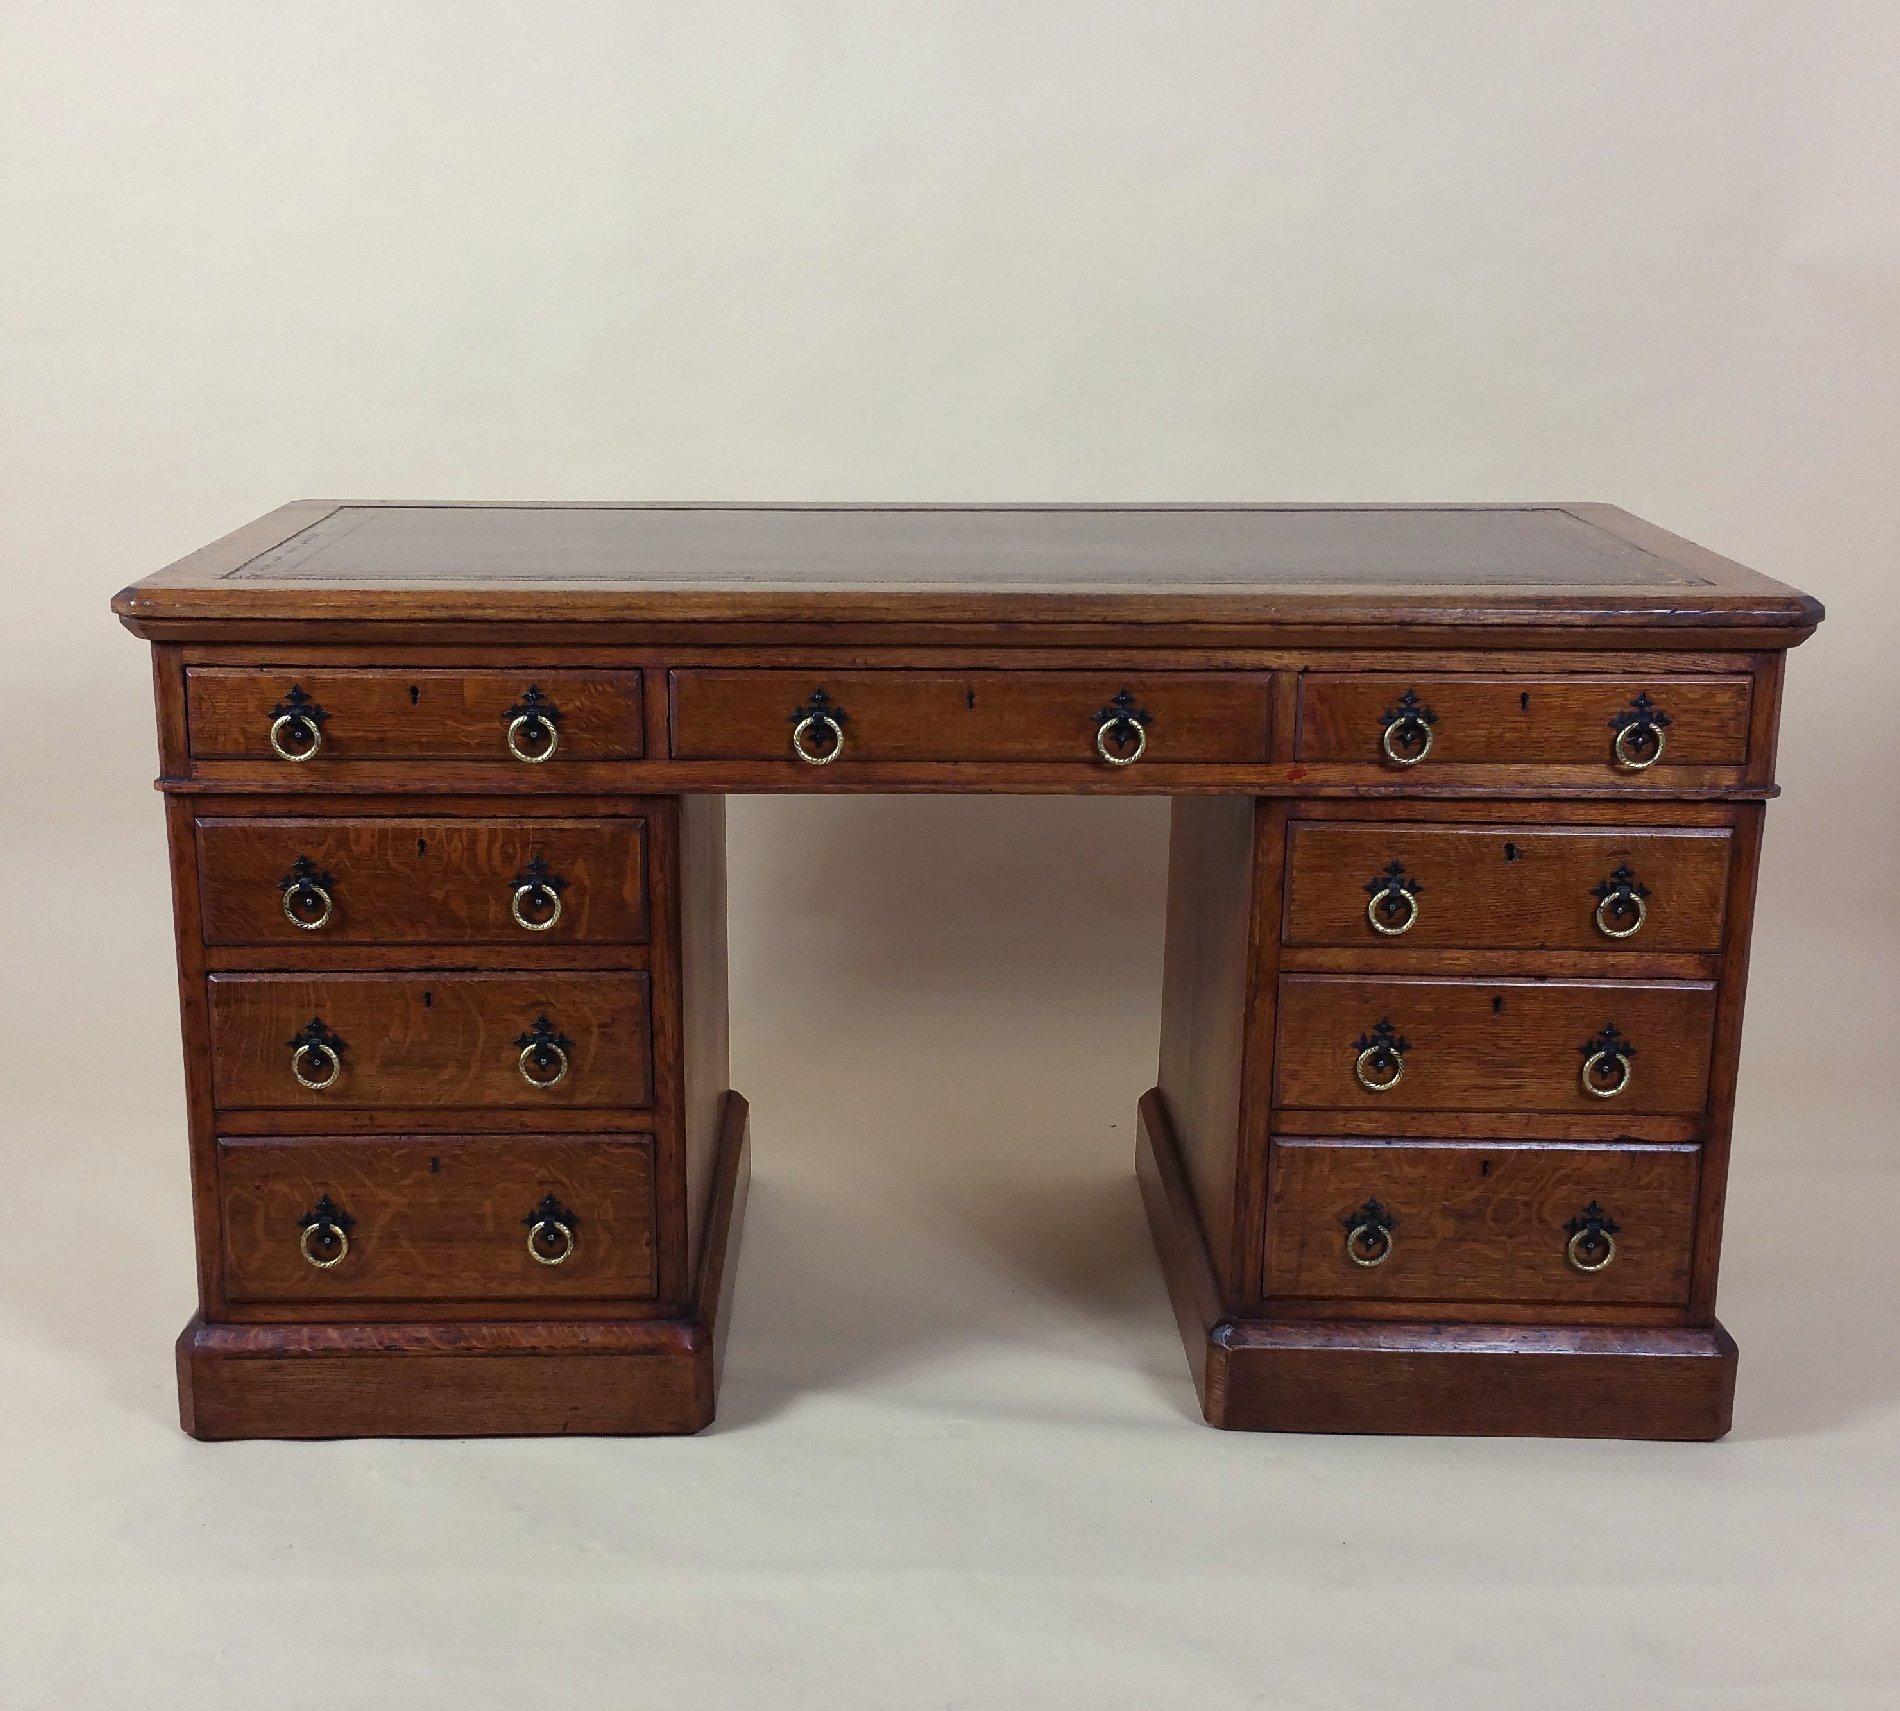 This marvellous and very handsome Victorian Gothic oak pedestal desk features four graduating drawers on either side with a central top drawer, finished with brass and iron designed Gothic pull handles. The desk is English and is topped with deep